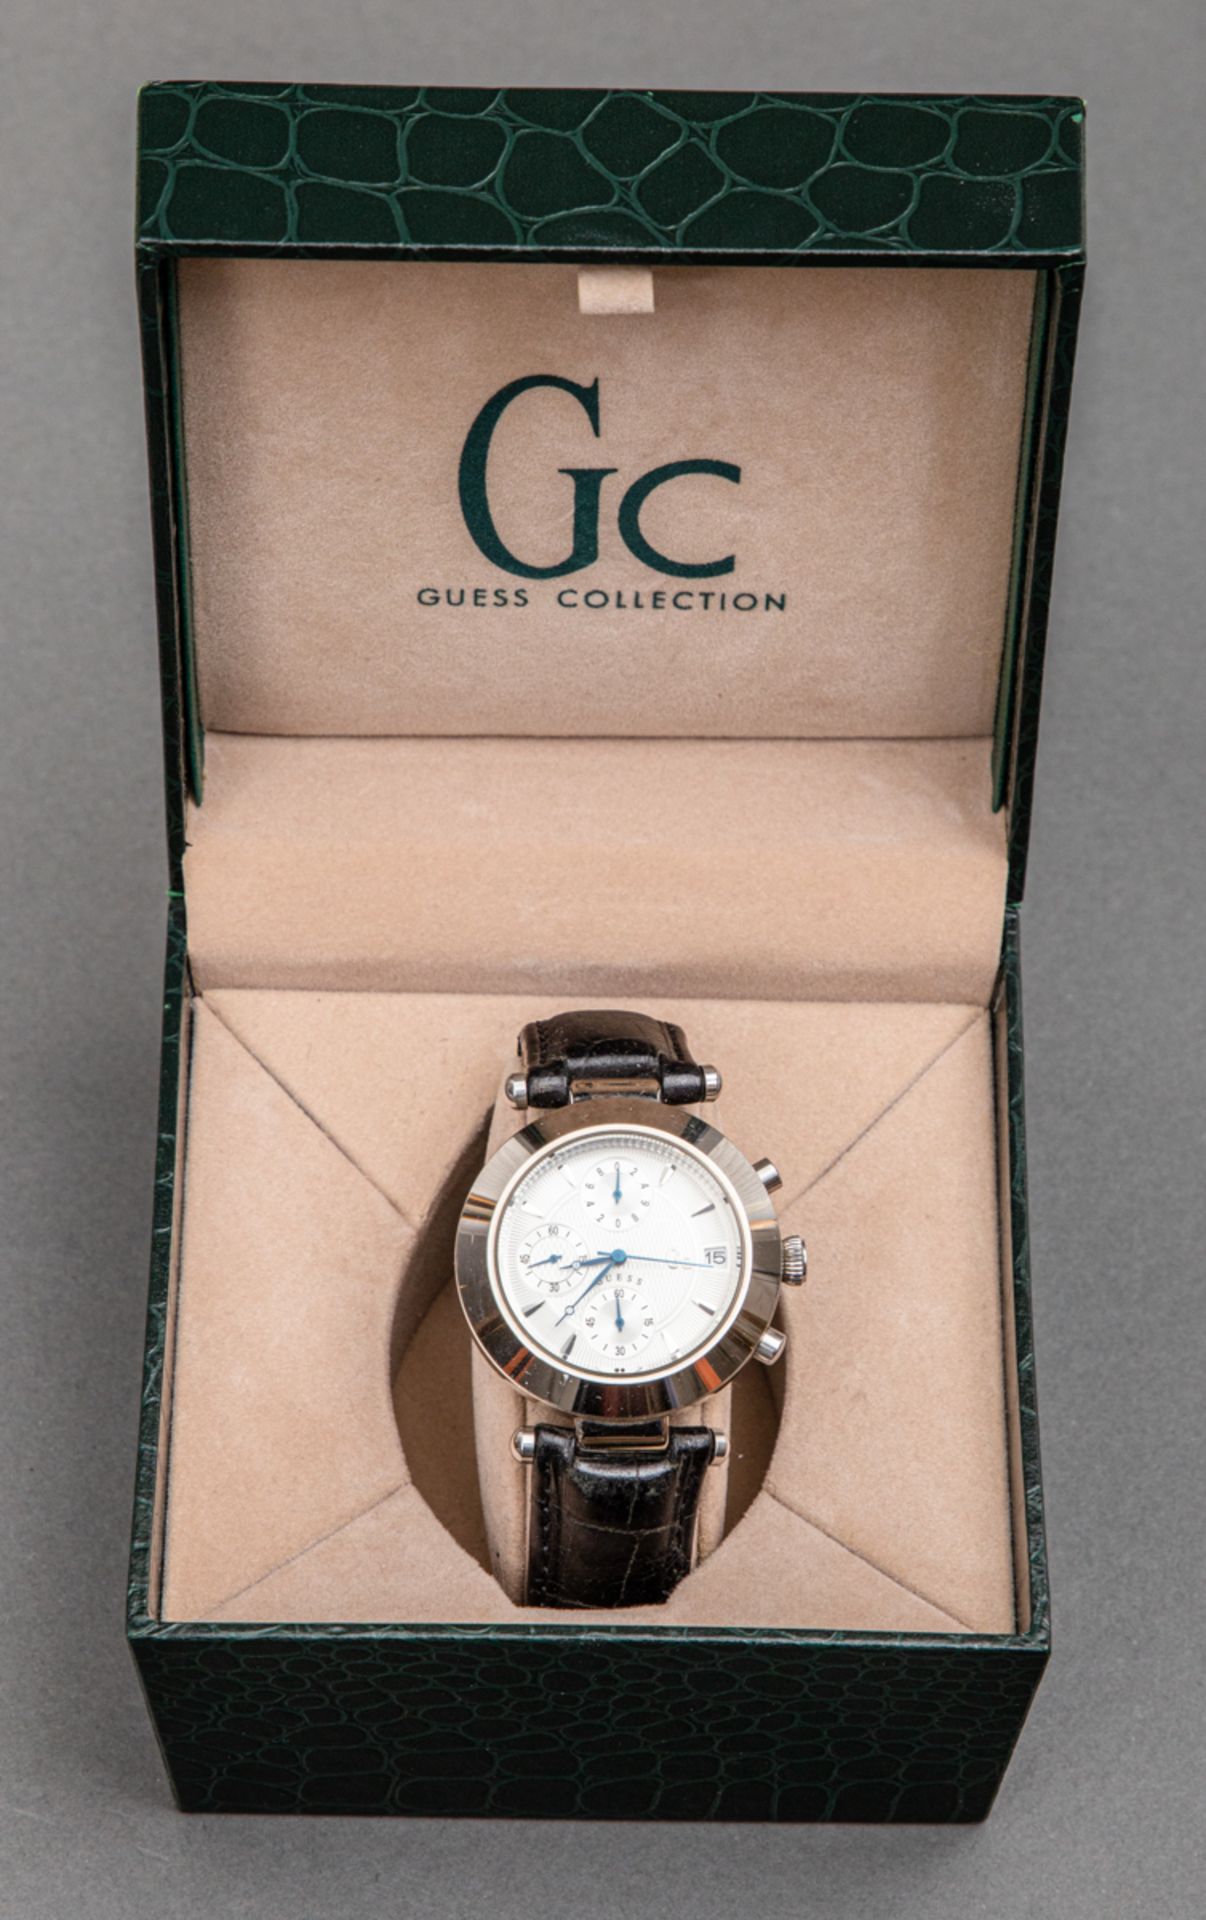 Guess Collection Herrenchronograph, 1999